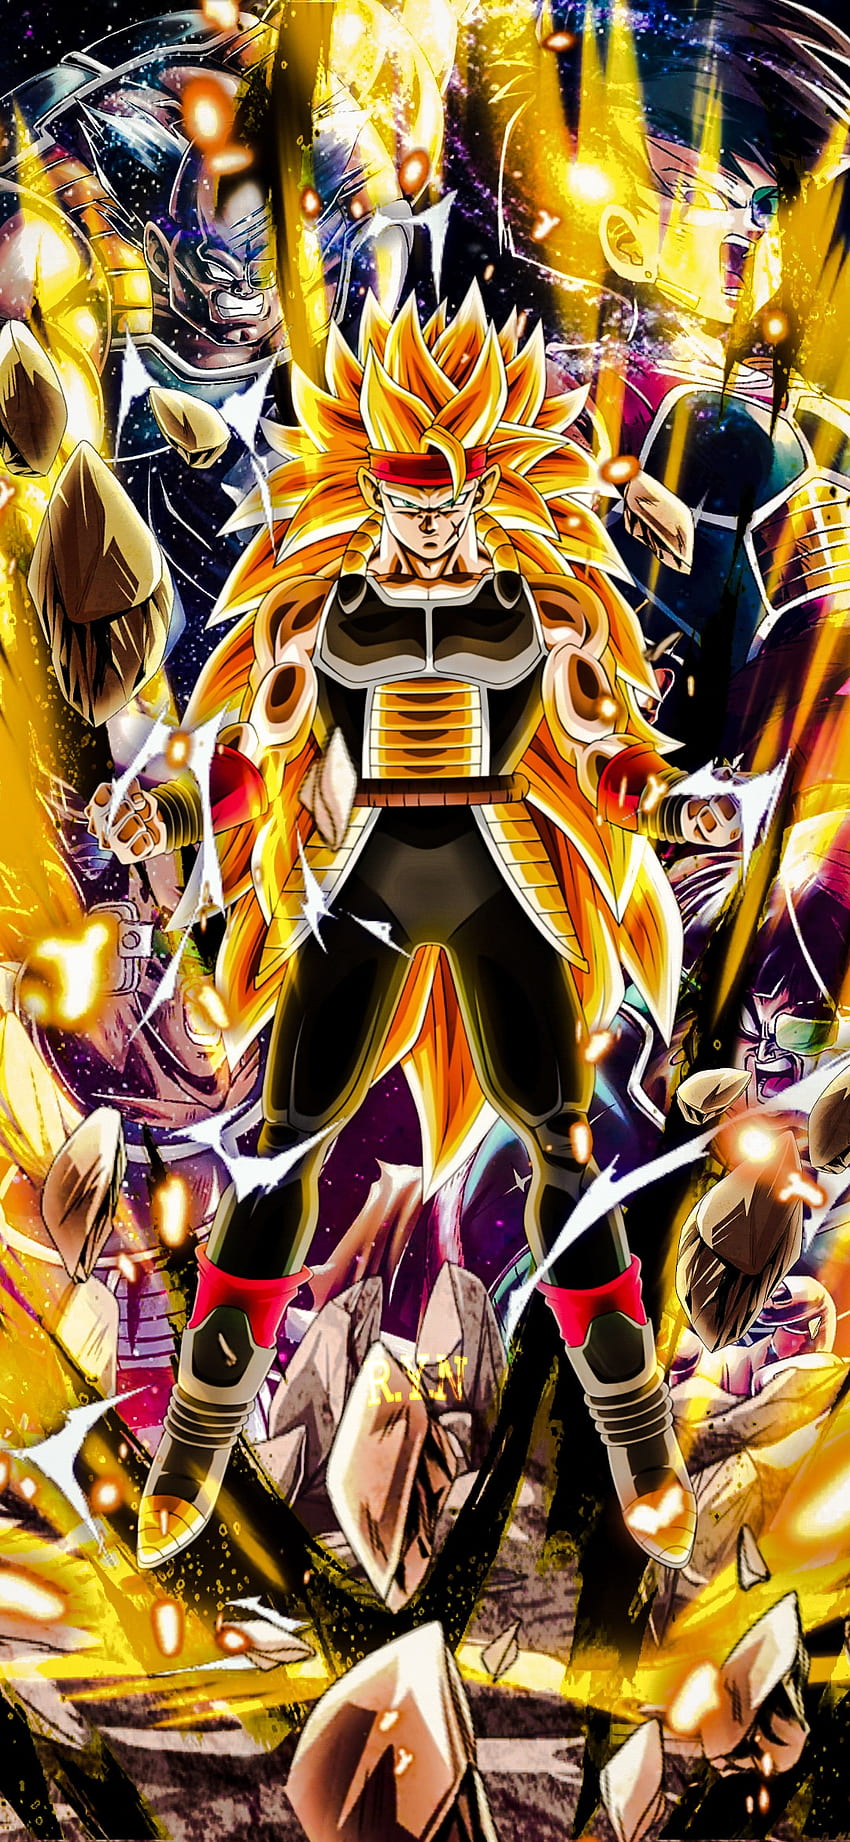 Destiny Defying Family  Goku  Bardock Icons  Phone Wallpaper I got  the idea from MjTheUltimates post on card art that look like duo units  when put side by side Ill